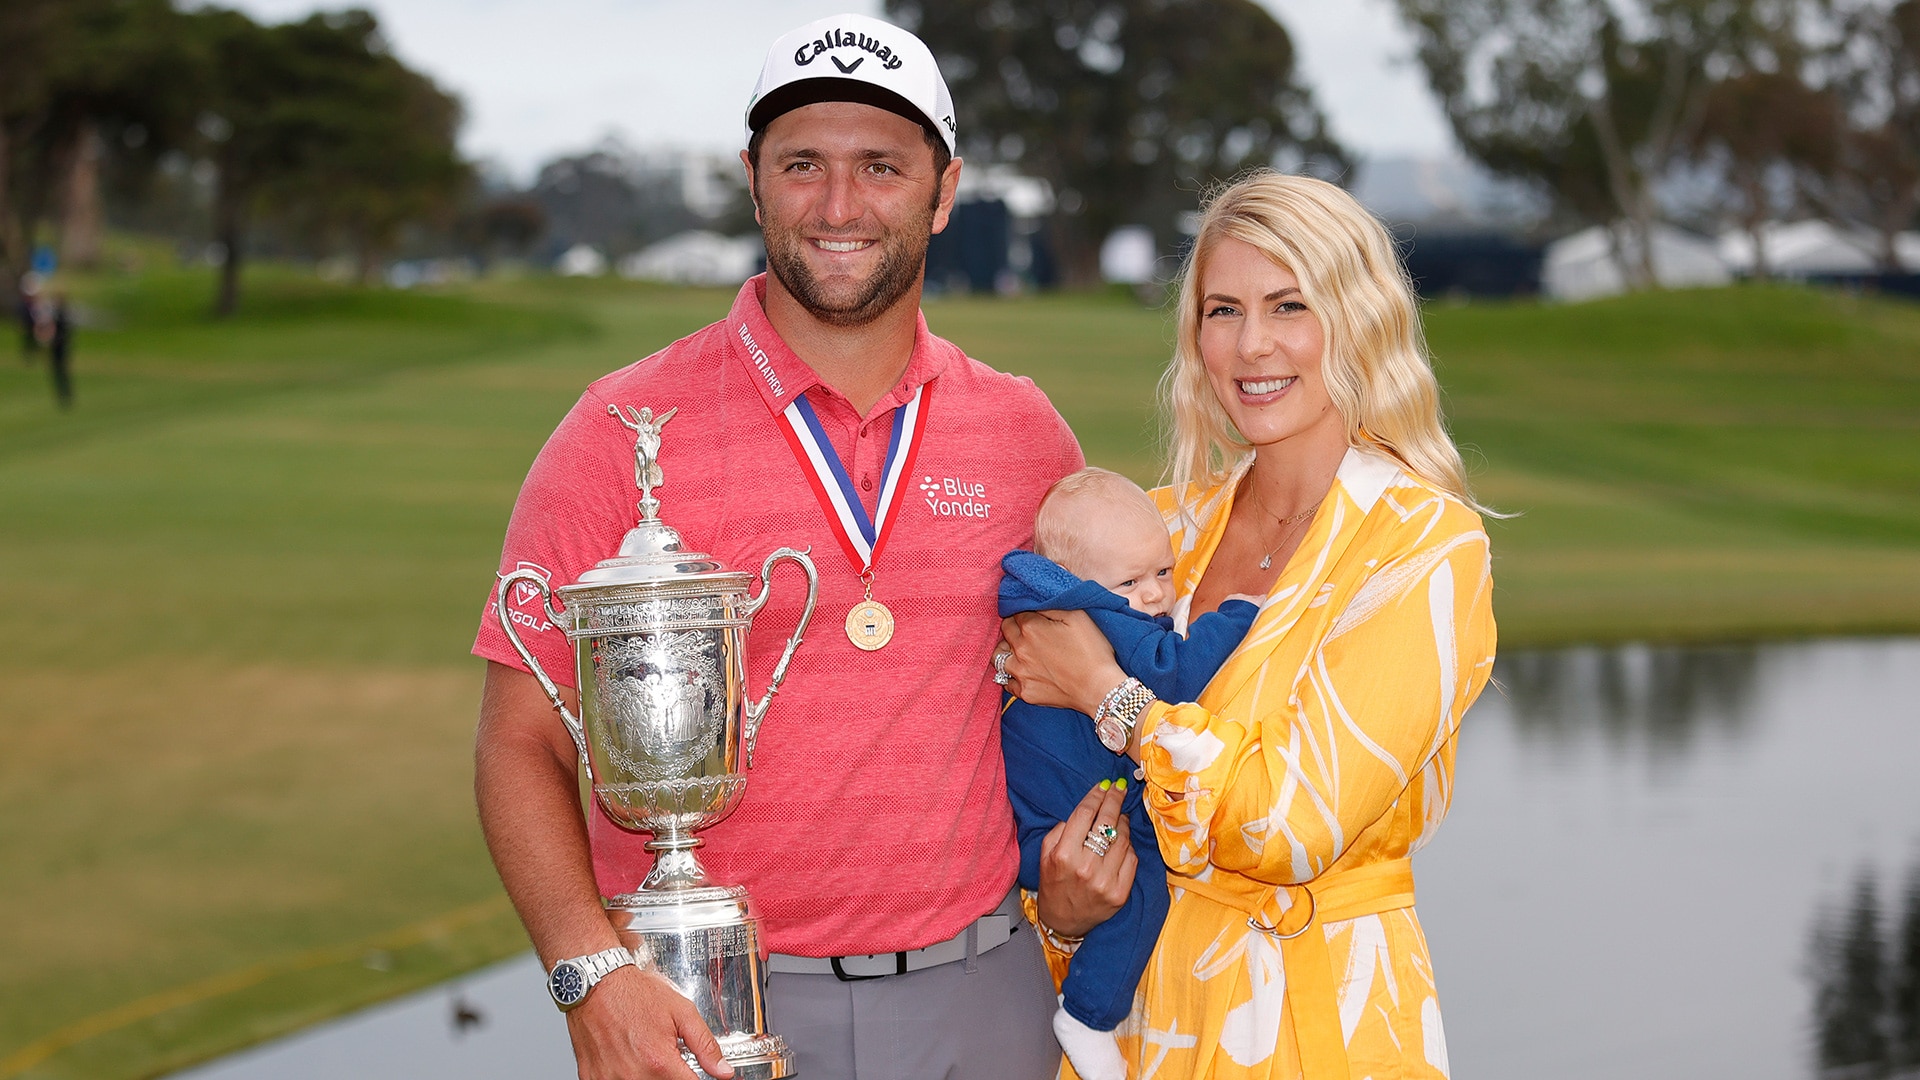 From experts to -1 knowledge, golf can be a learning curve for players’ wives